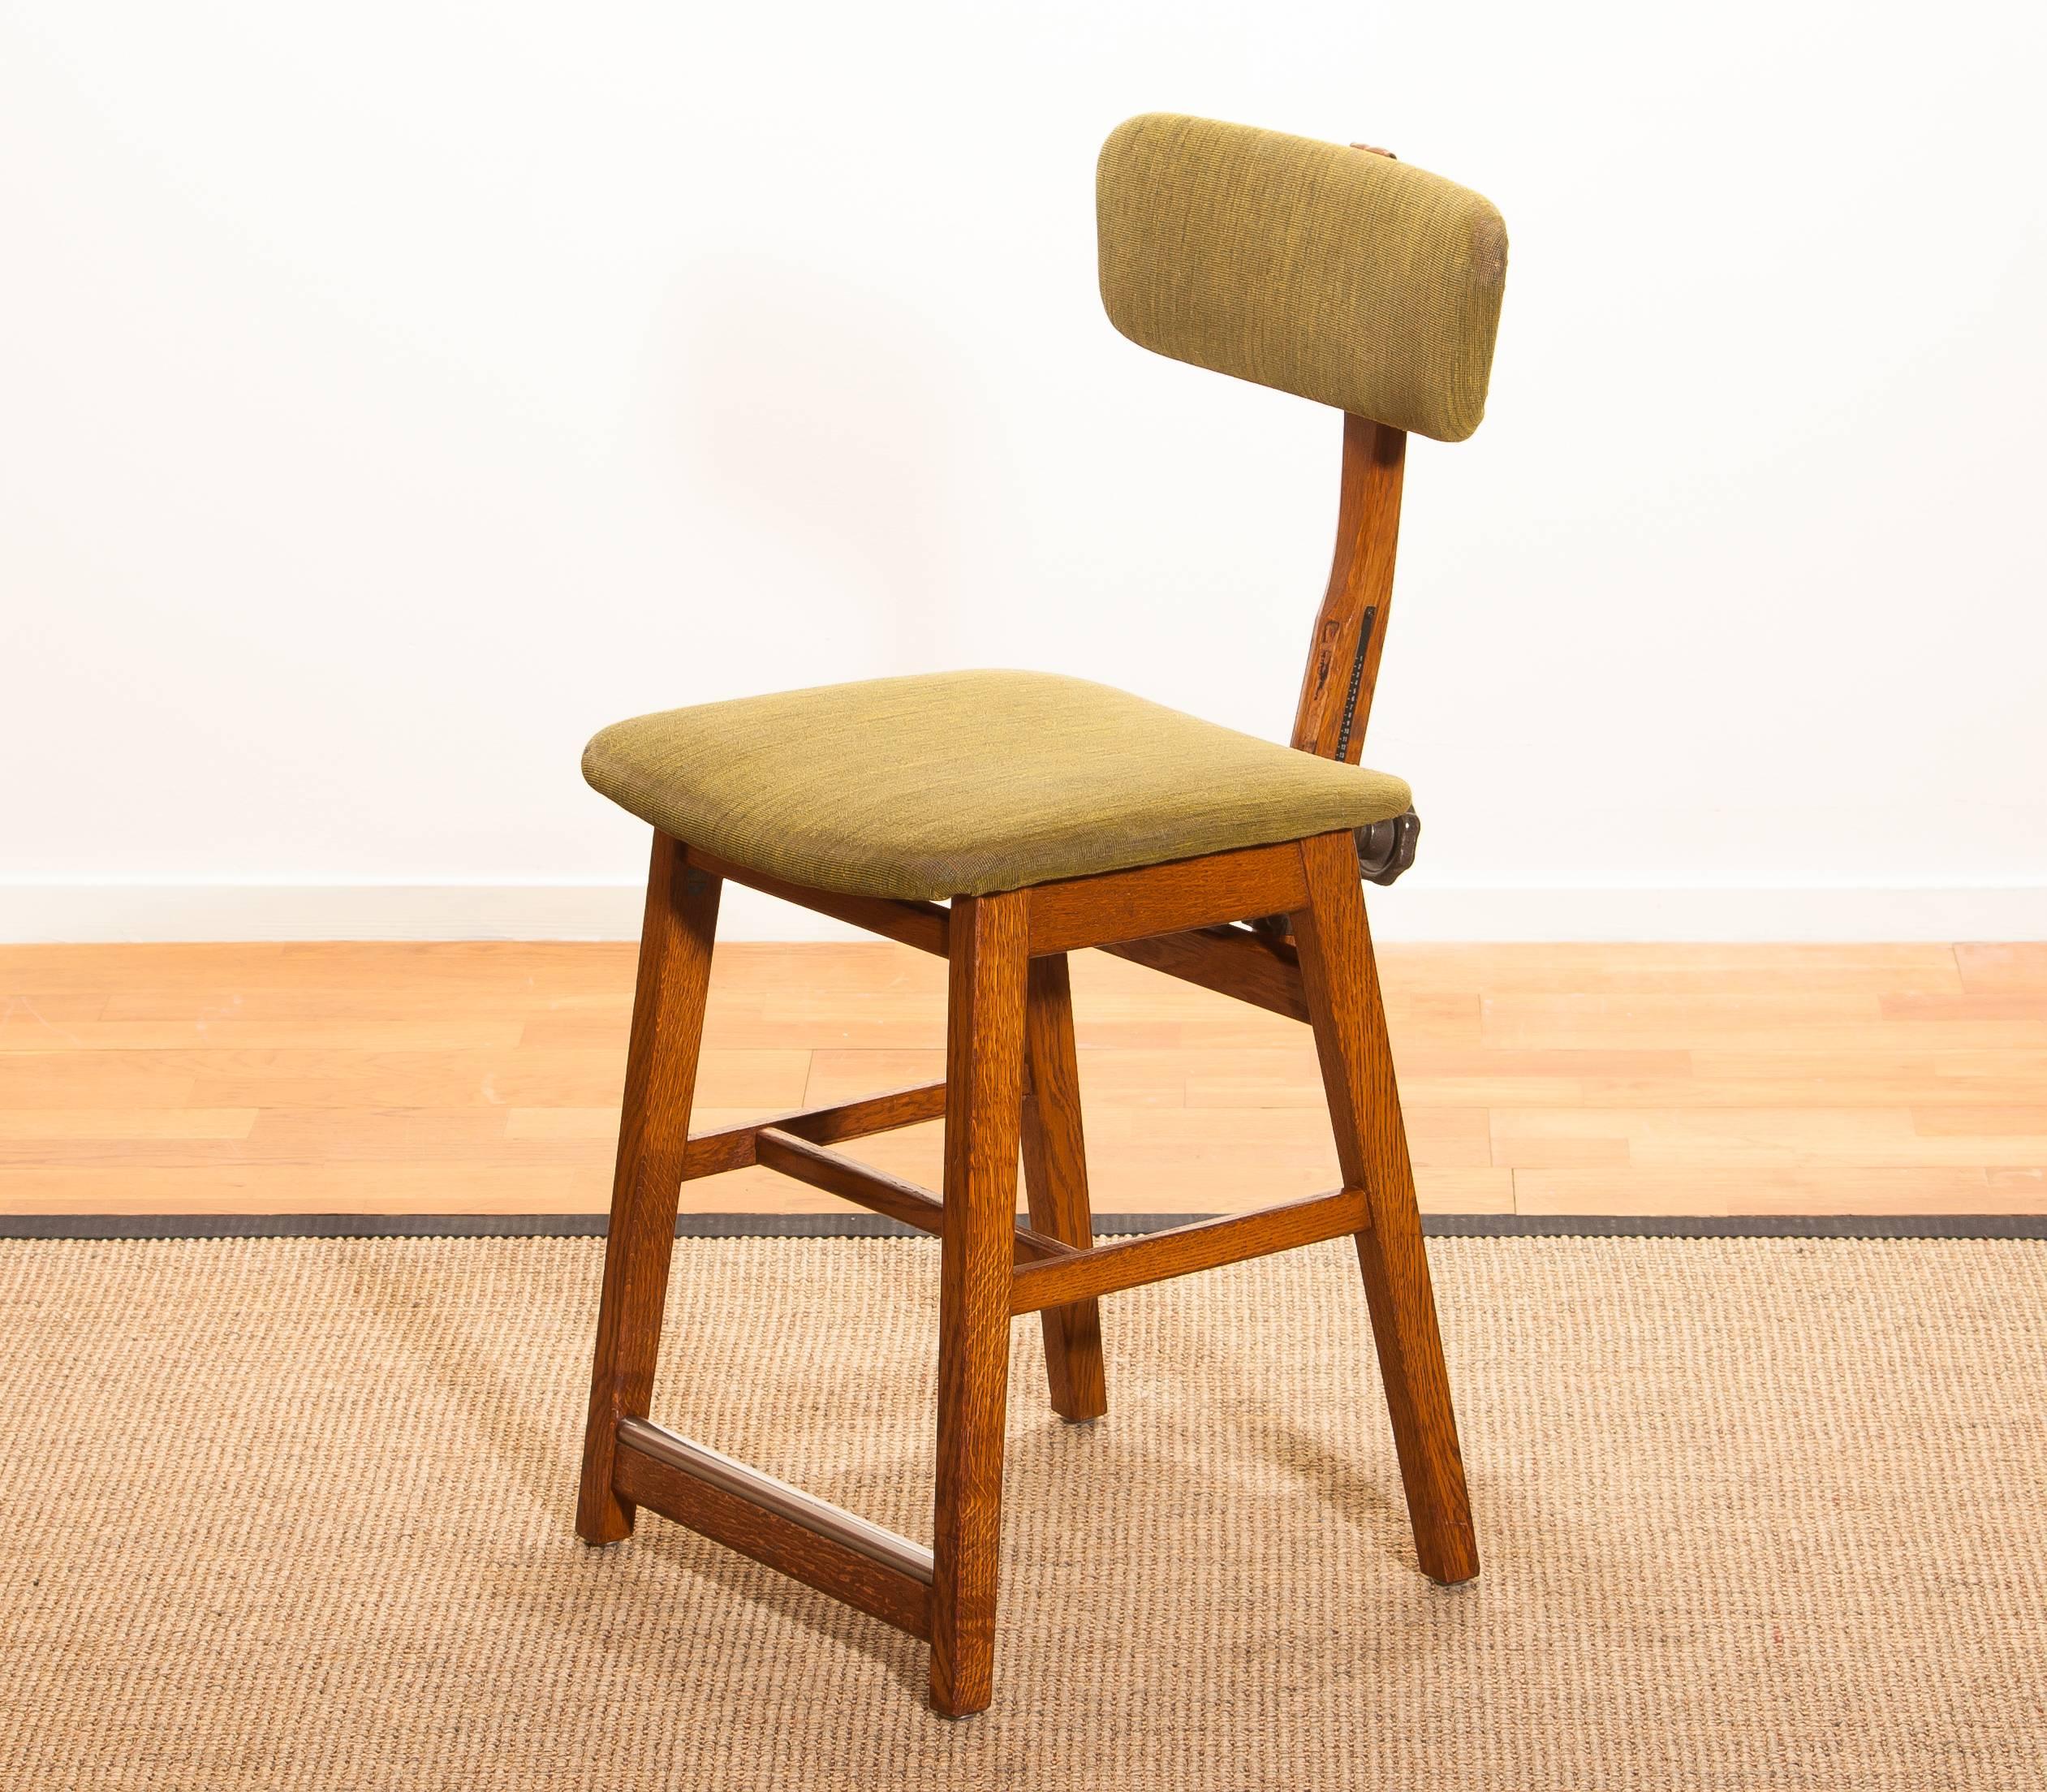 1960s, Teak and Wool Desk Chair by Âtvidabergs Sweden 1